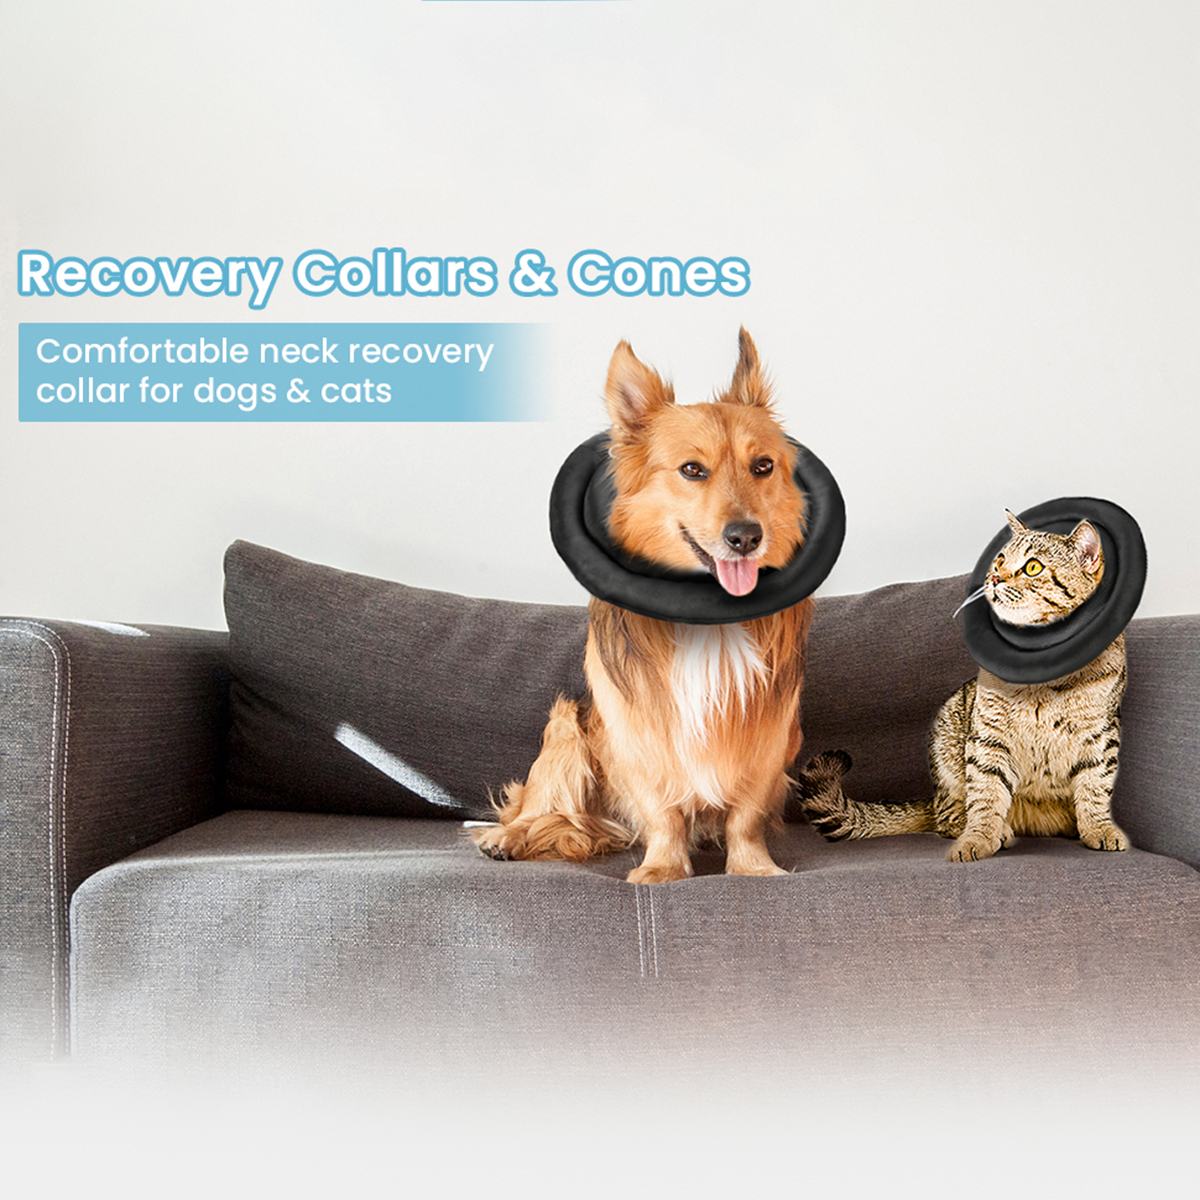 Protective-Cone-for-Dogs-Cats-After-Surgery-Soft-Elizabethan-Collar-Recovery-Puppy-Pet-Supplies-1958015-12